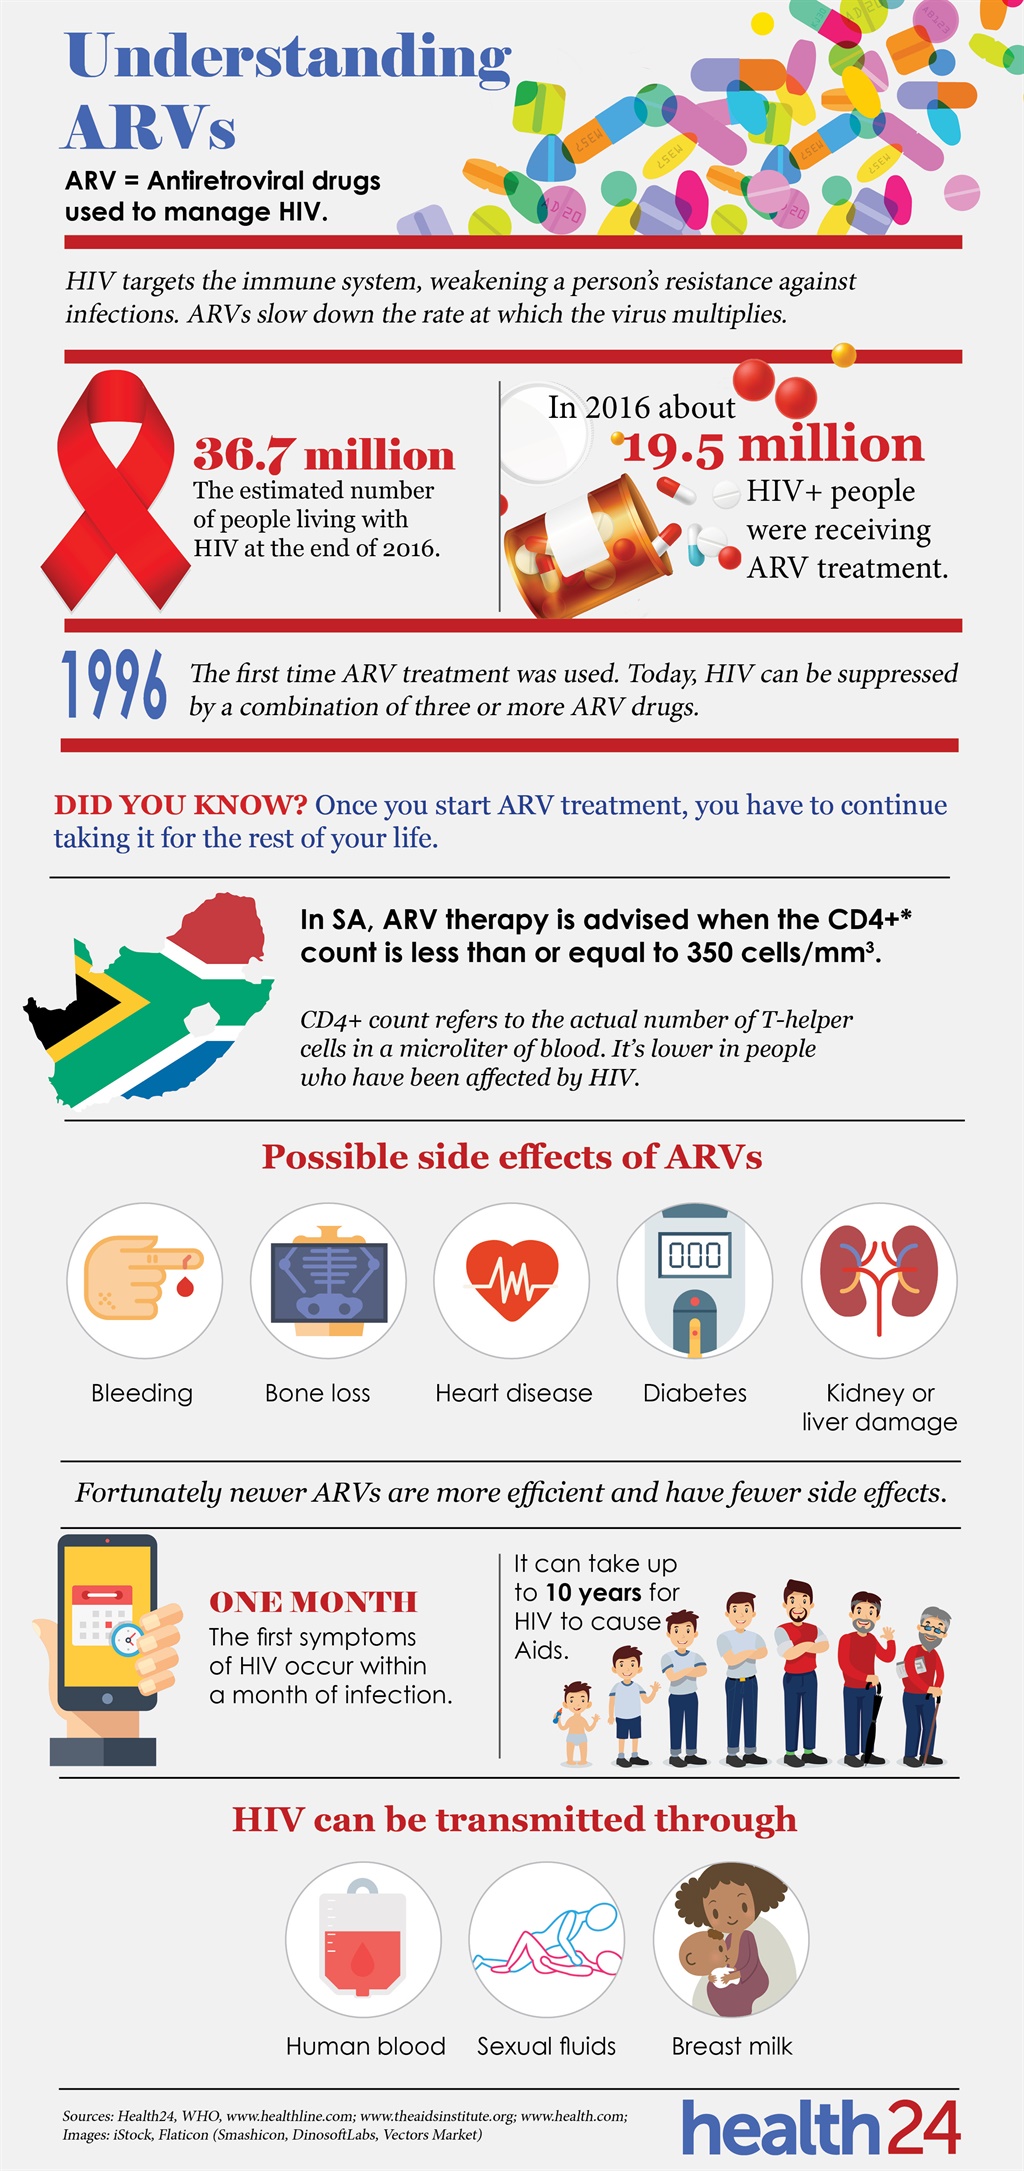 Infographic about HIV and ARVs